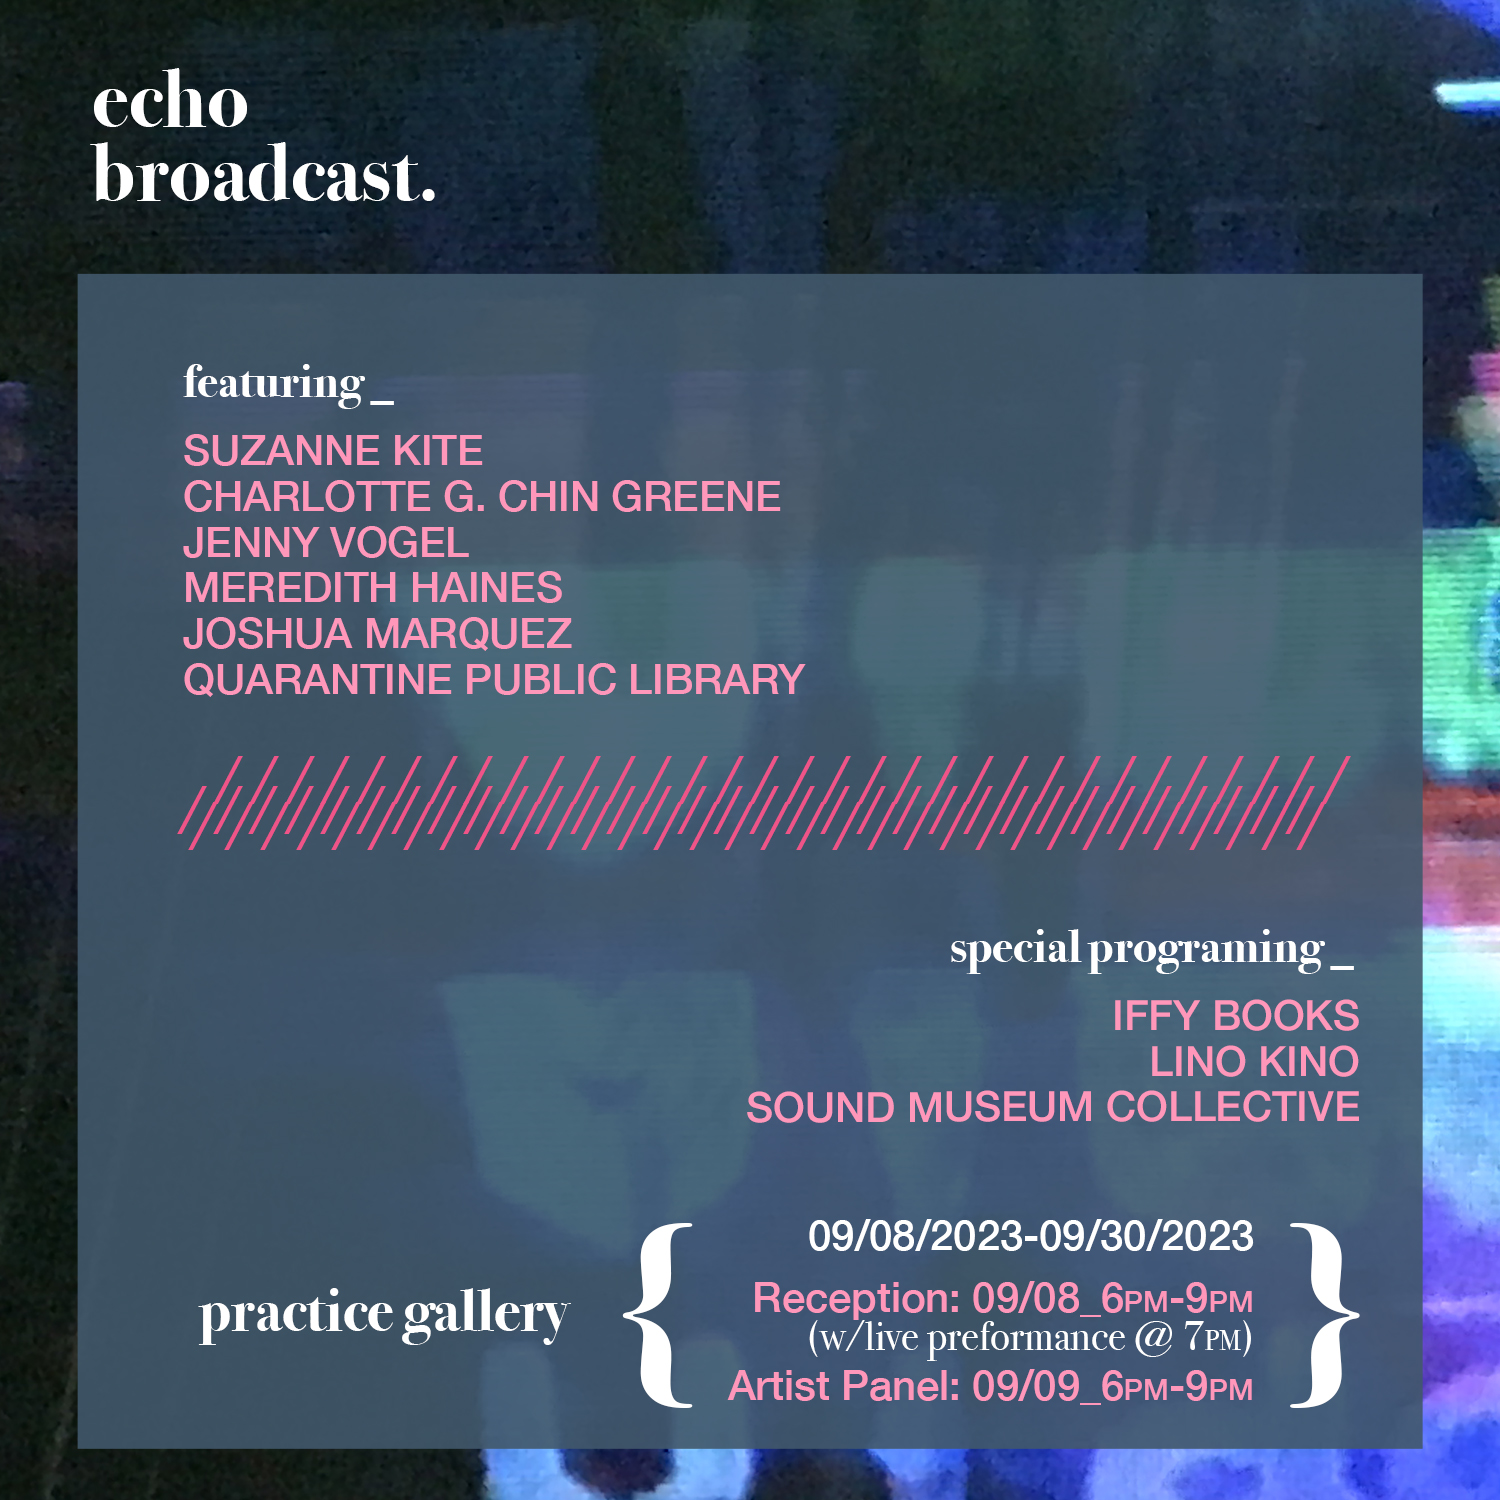 Flyer for Echo Broadcast show at Practice Gallery, with the following text: featuring Suzanne Kite, Charlotte G. Chin Greene, Jenny Vogel, Meredith Haines, Joshua Marquez, Quarantine Public Library / Special programming: Iffy Books, Lino Kino, Sound Museum Collective / Practice Gallery / 9/9/2023-9/30/2023 Reception: 9/8 6PM w/live performance @7PM / Artist Panel: 9/9 6PM-9PM